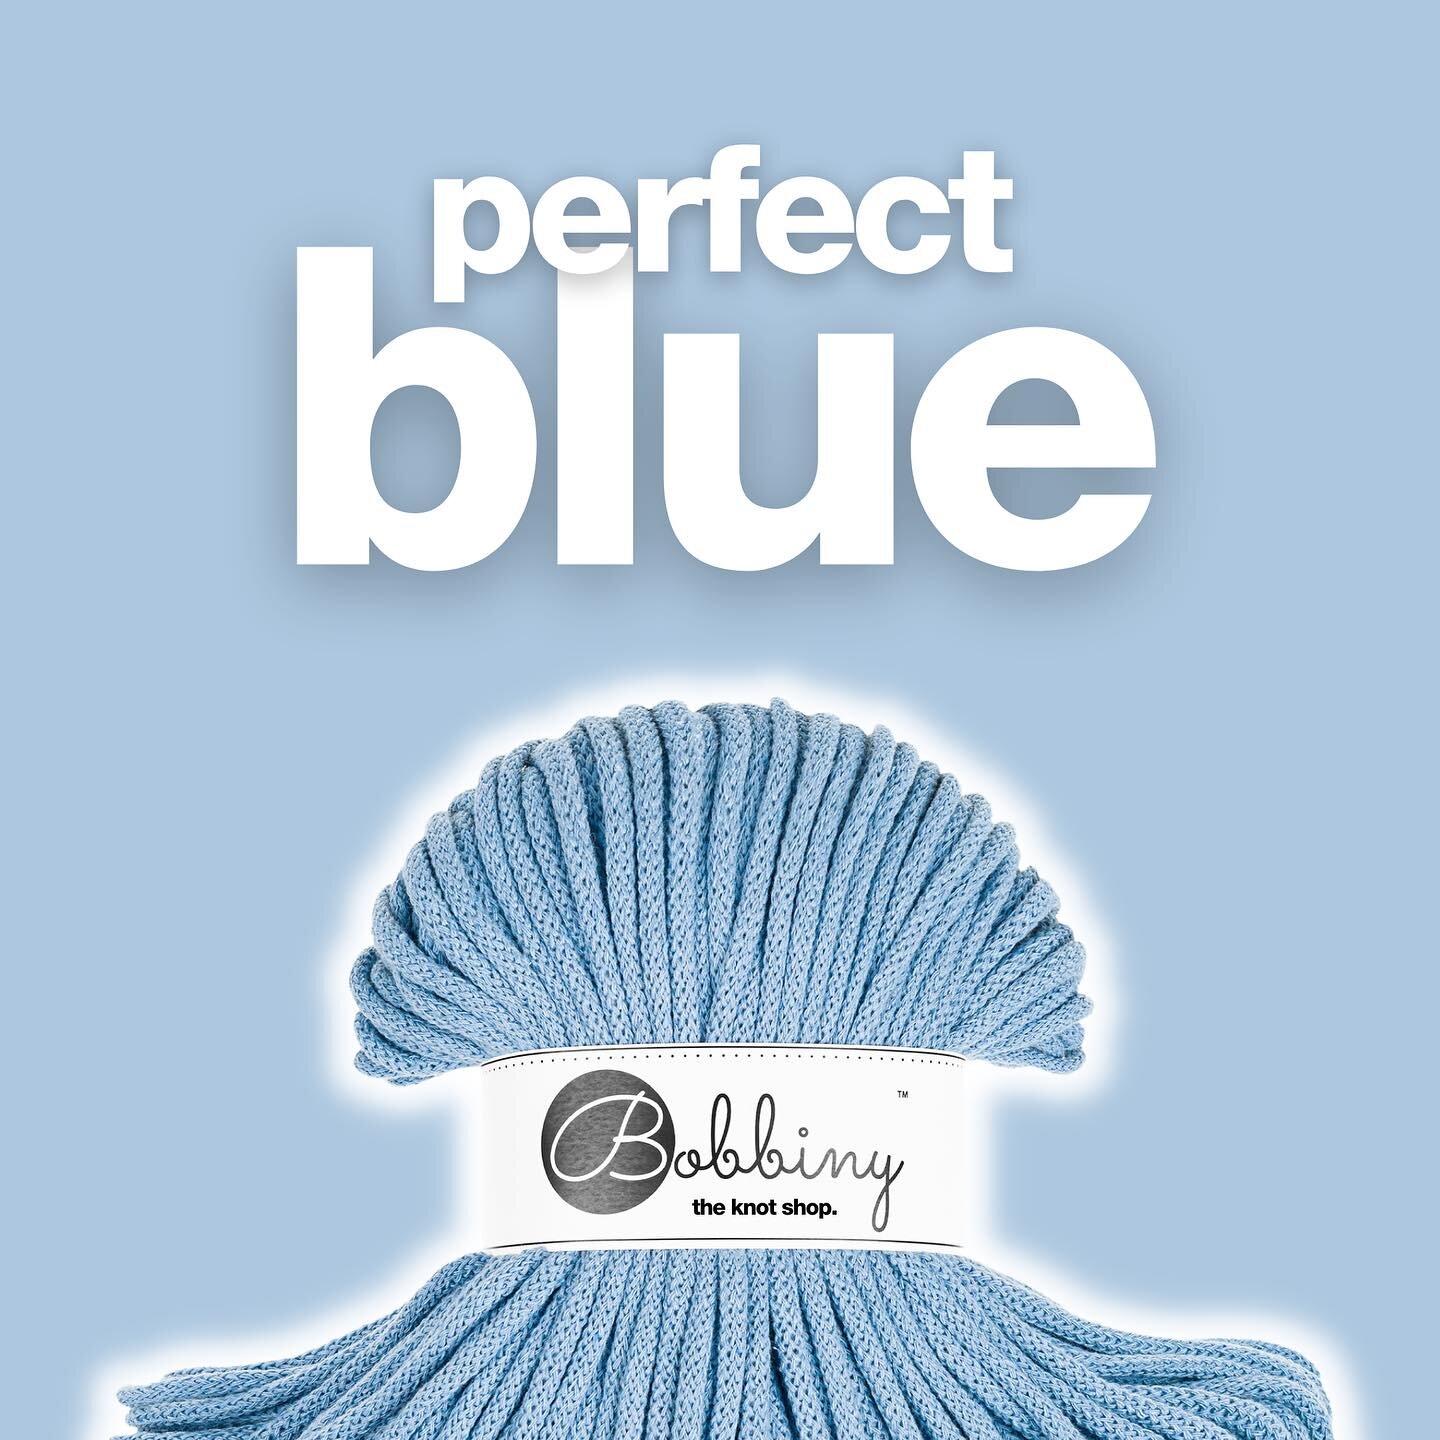 introducing 𝕡𝕖𝕣𝕗𝕖𝕔𝕥 𝕓𝕝𝕦𝕖 👌🏻 refreshing like a mountain lake 💦 this vibrant shade is great for icy, winter projects but also energetic summer ones 🙌🏻

swipe through for some project inspo with the second new cord colour from bobbiny's 